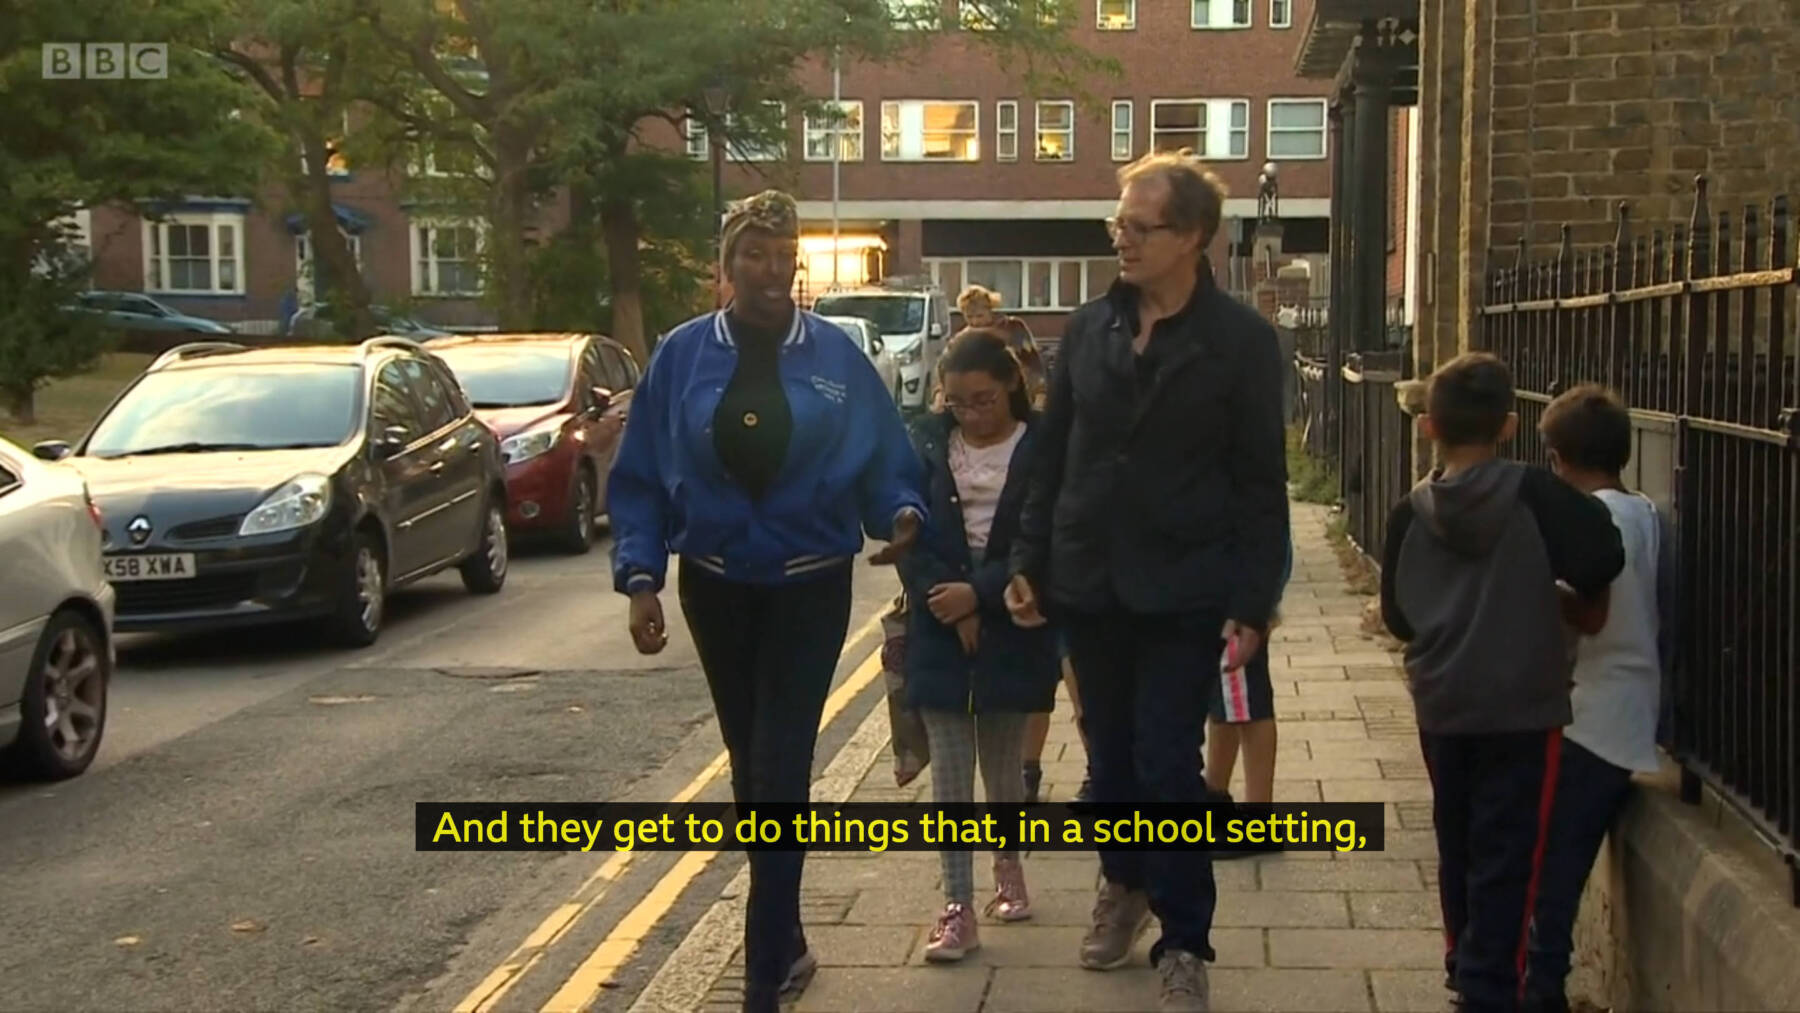 The BBC’s David Sillito walking down the street in Margate with the kids of Open School East’s Despacito Art School